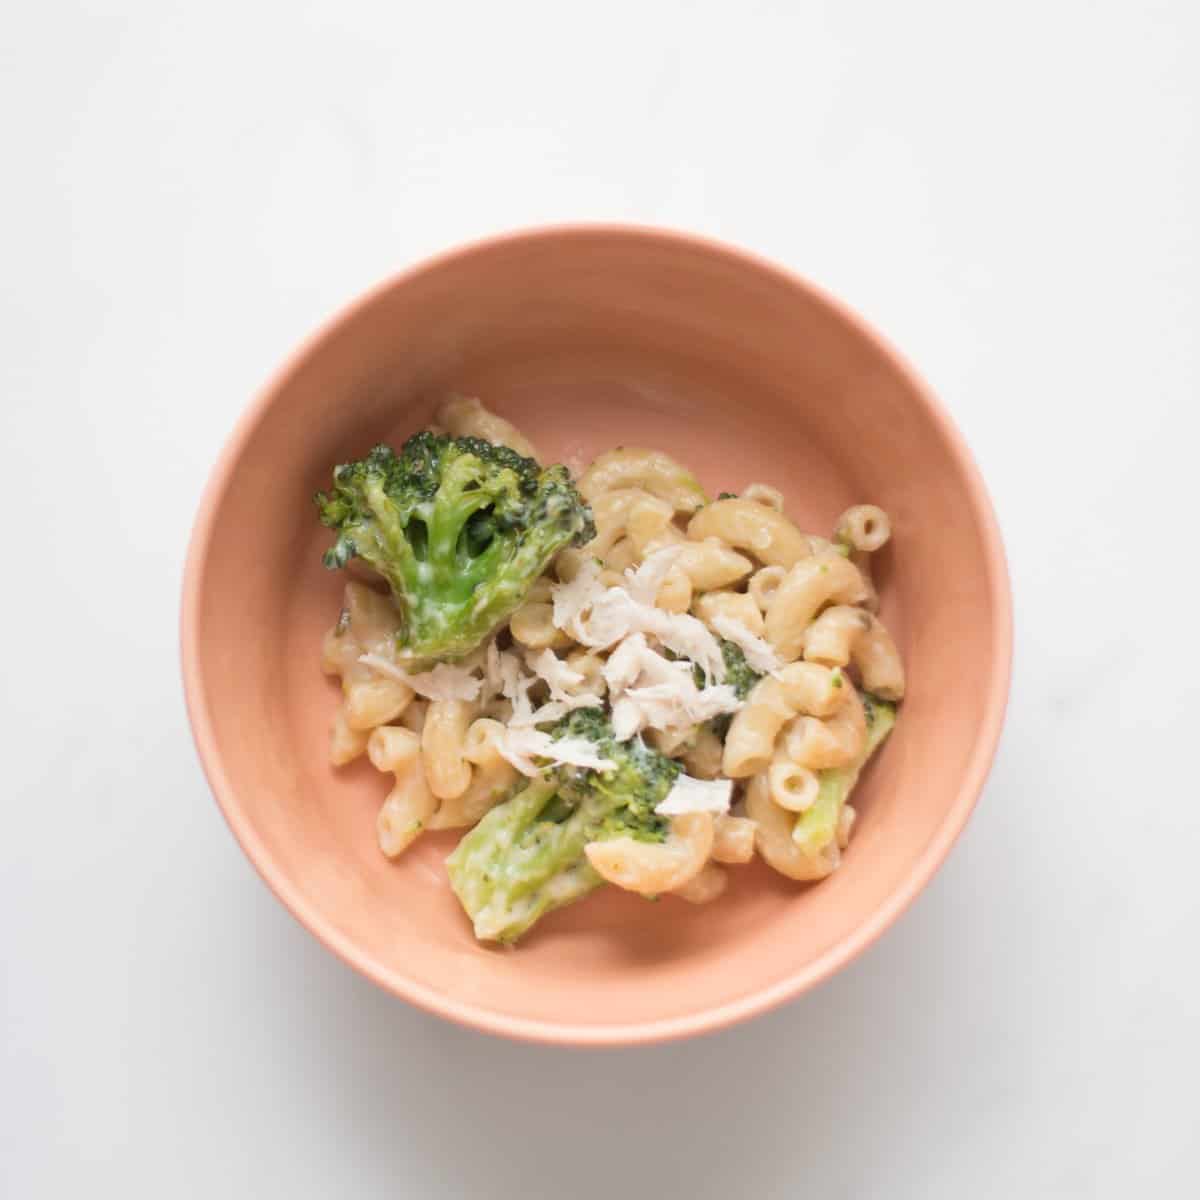 pasta served in a bowl with big broccoli floret and shredded chicken.